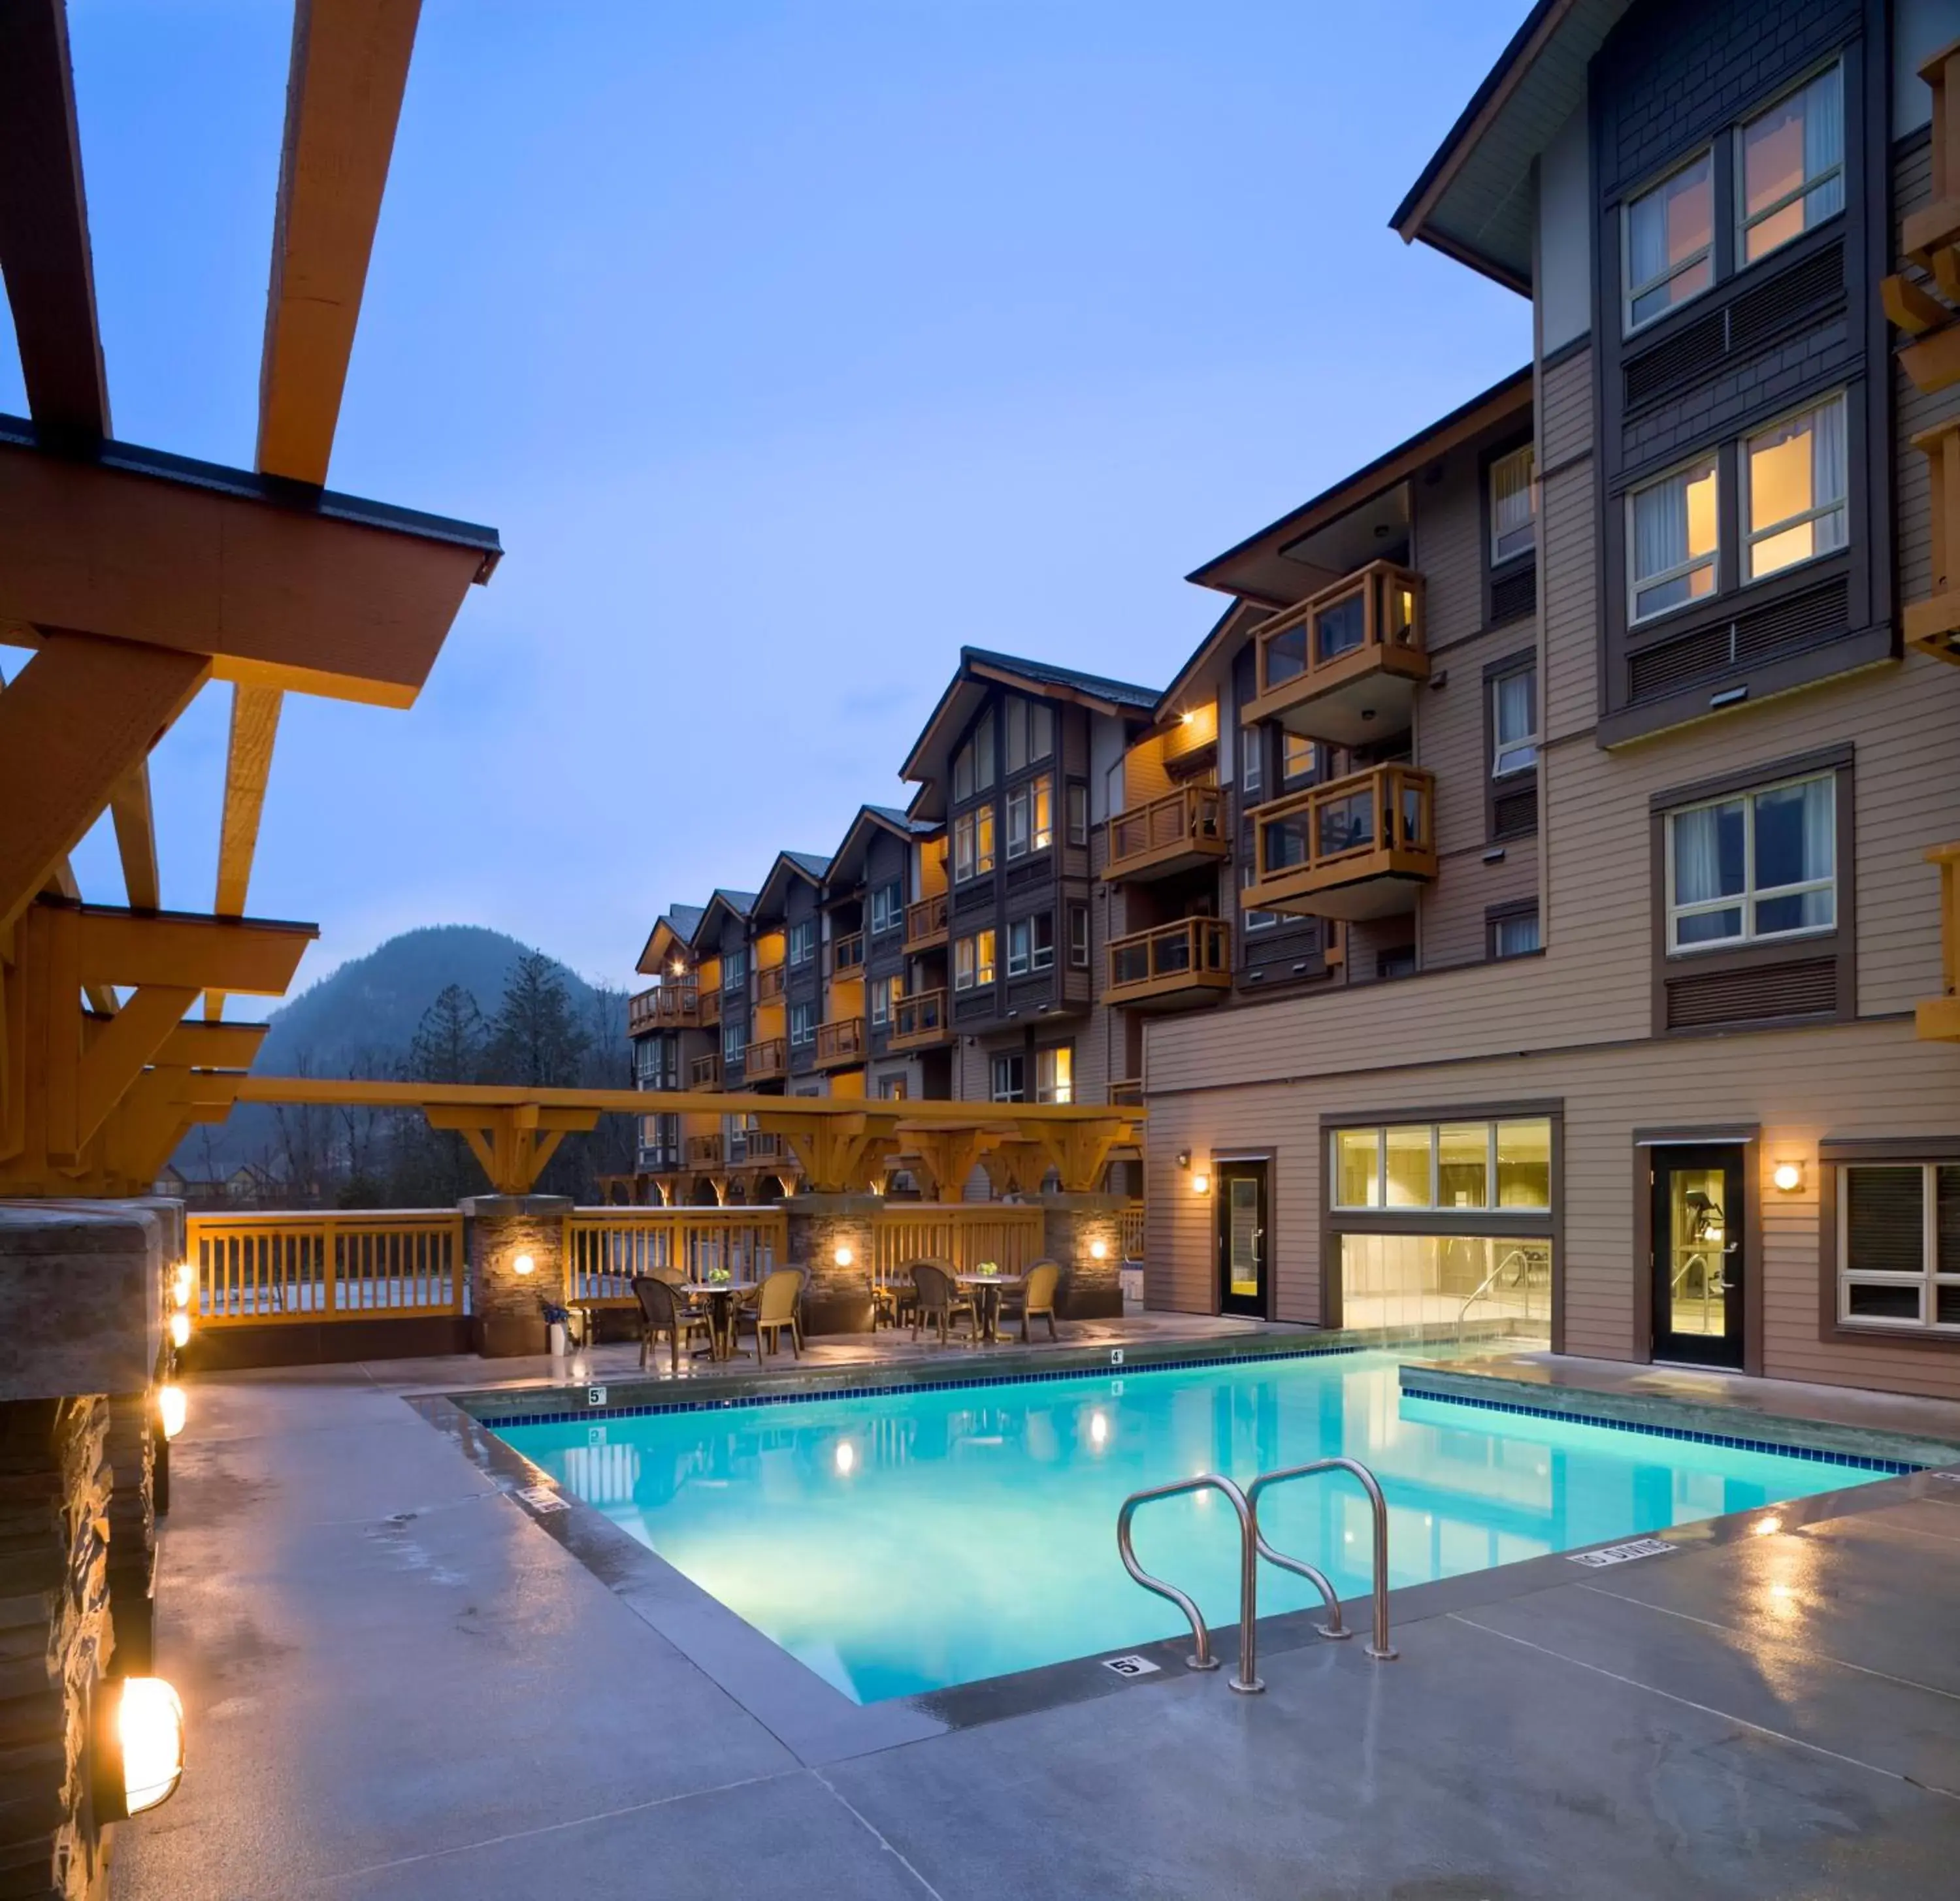 Swimming Pool in Executive Suites Hotel and Resort, Squamish